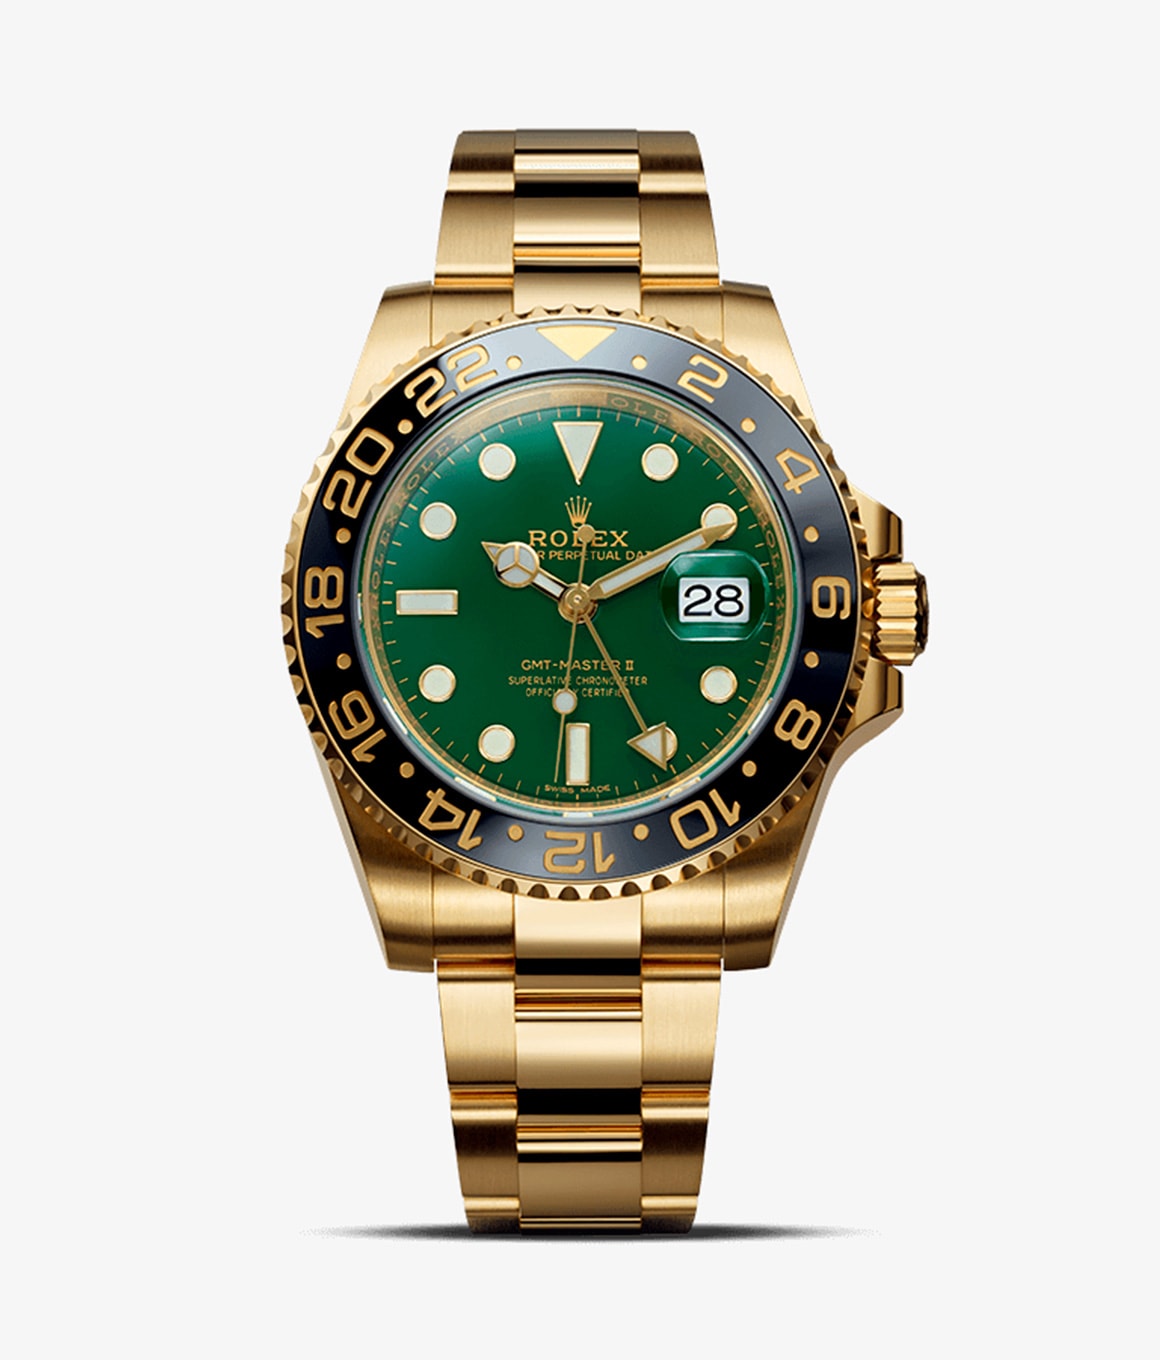 Rolex Oyster Perpetual Submariner Date Ref. 16610